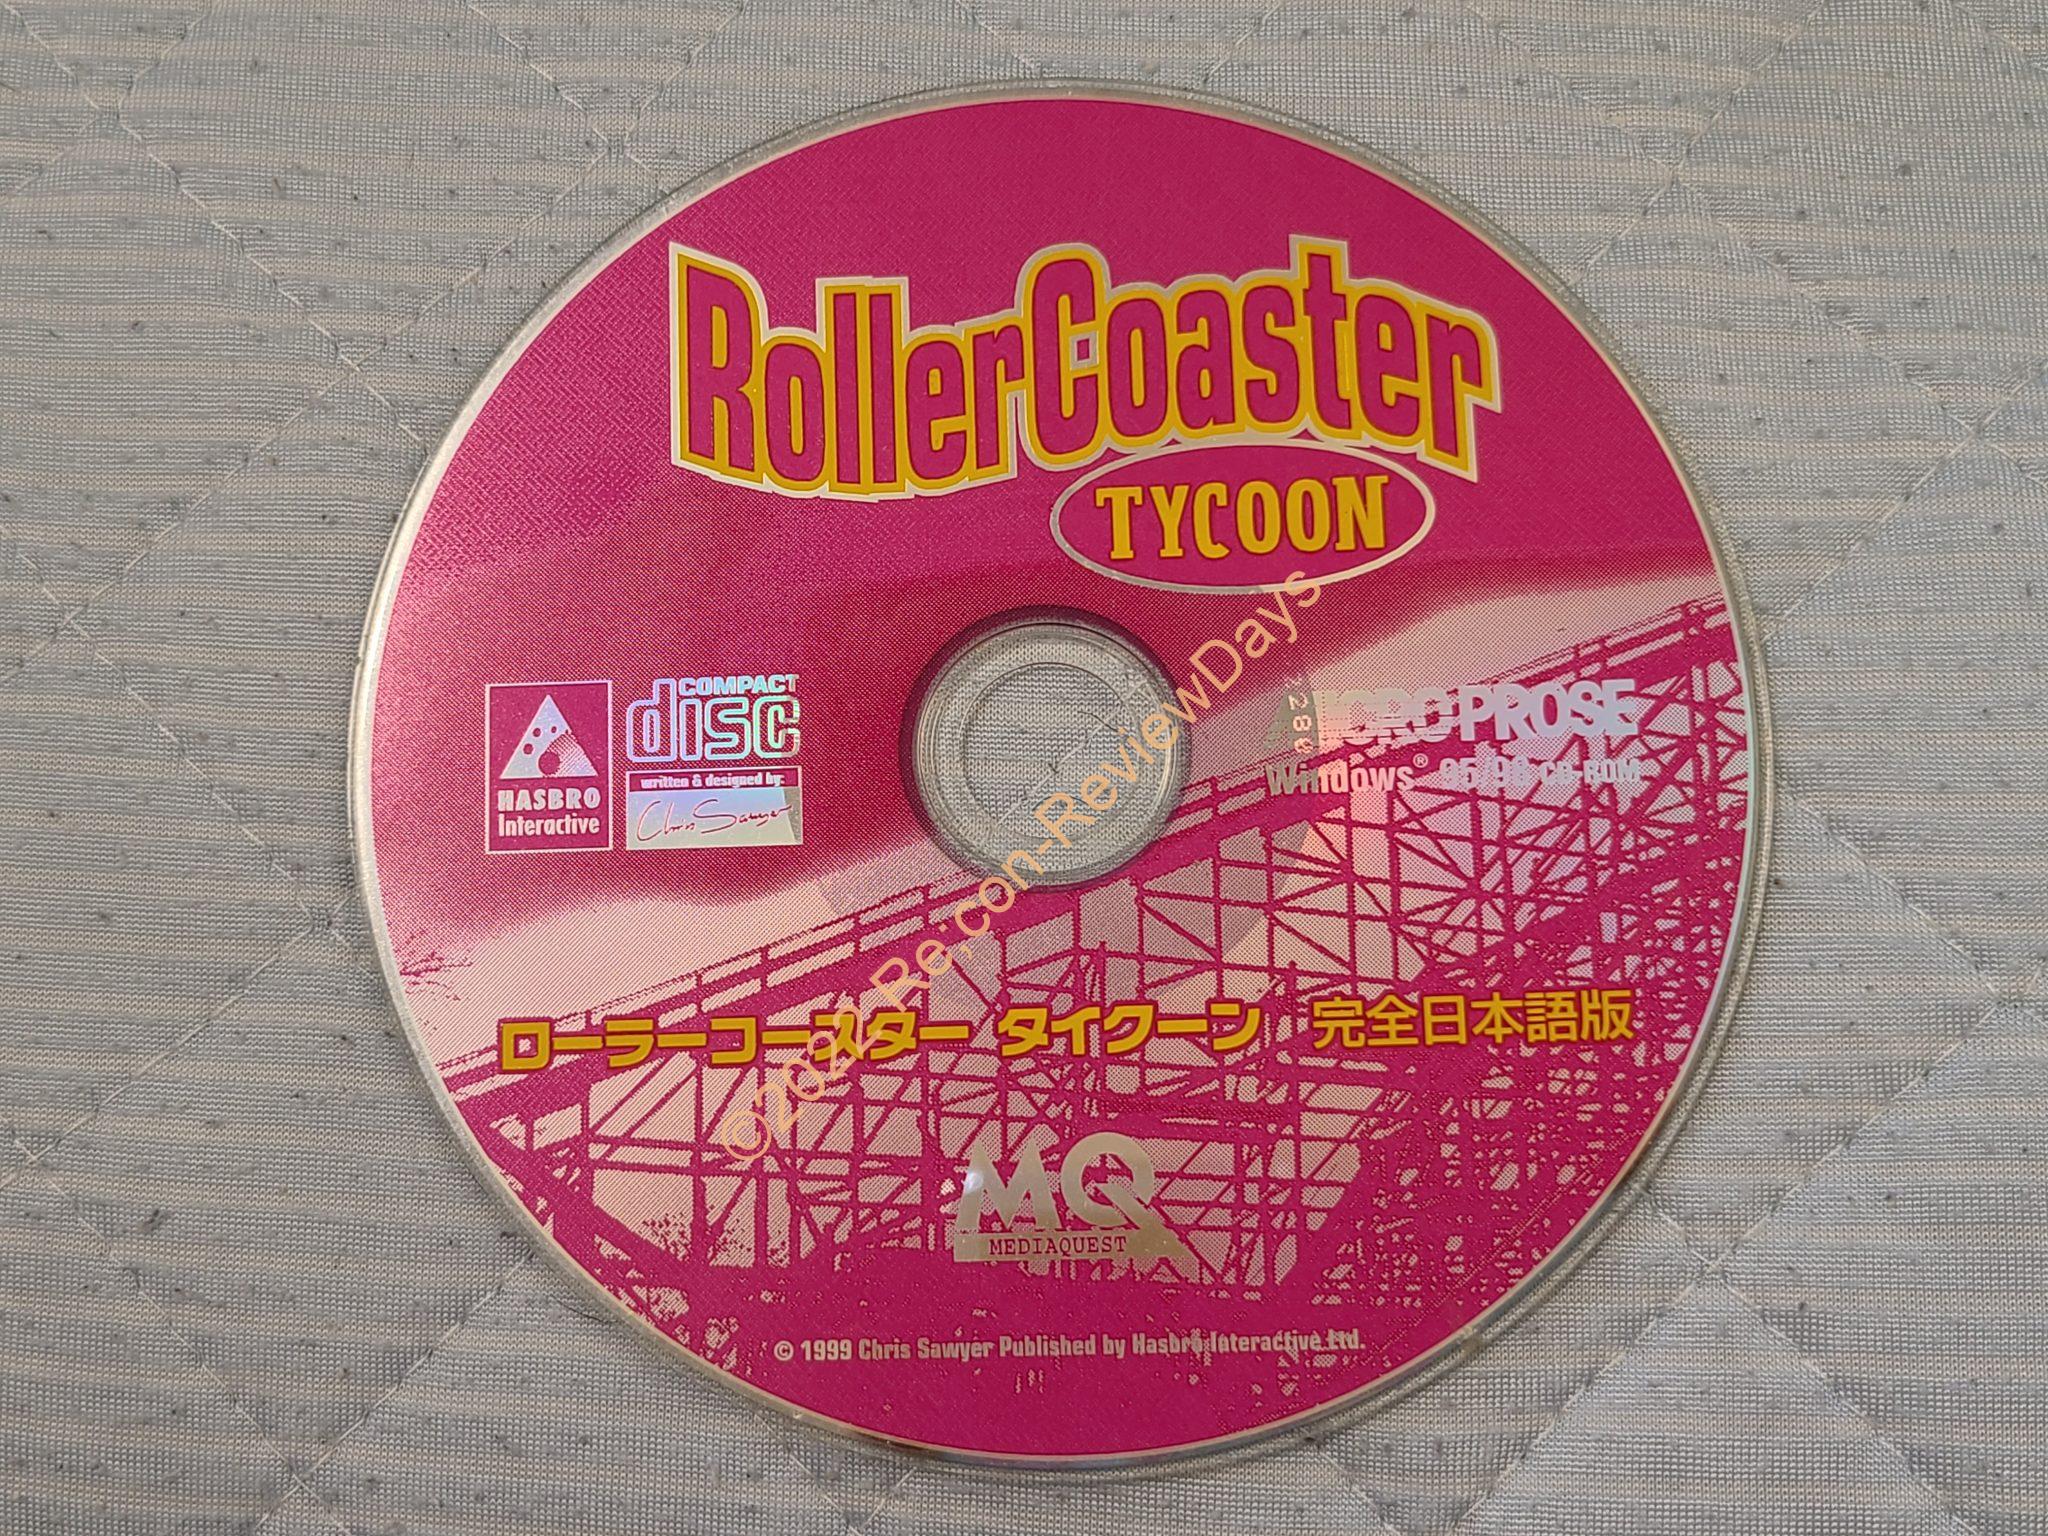 Steamで販売されているRollerCoaster Tycoon Deluxeおよび「RollerCoaster Tycoon 2 Triple Thrill Pack」は「OpenRCT2」で日本語化が可能 #RCT #RCT1 #RCT2 #Steam #ゲーム